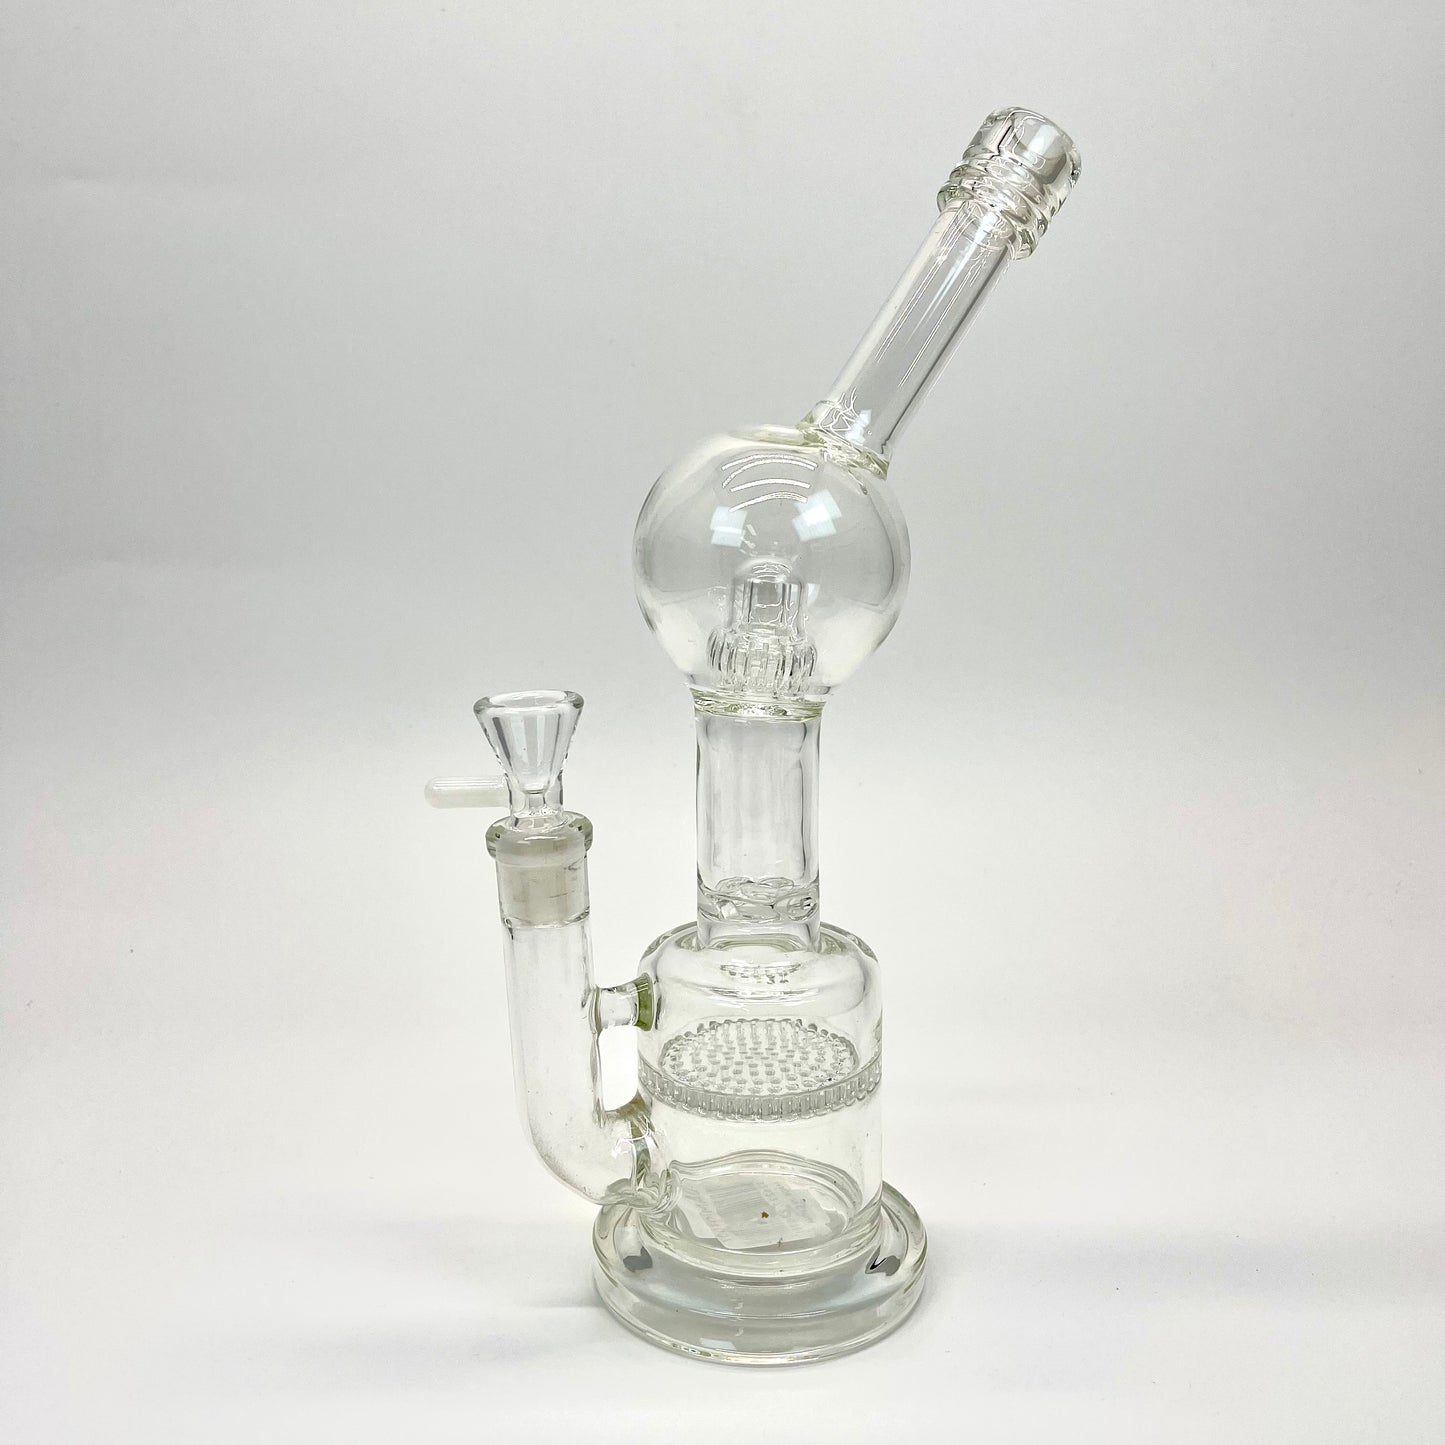 Weedo Large Glass Bongs (30cm)(Special Edition Only 1 In Stock)